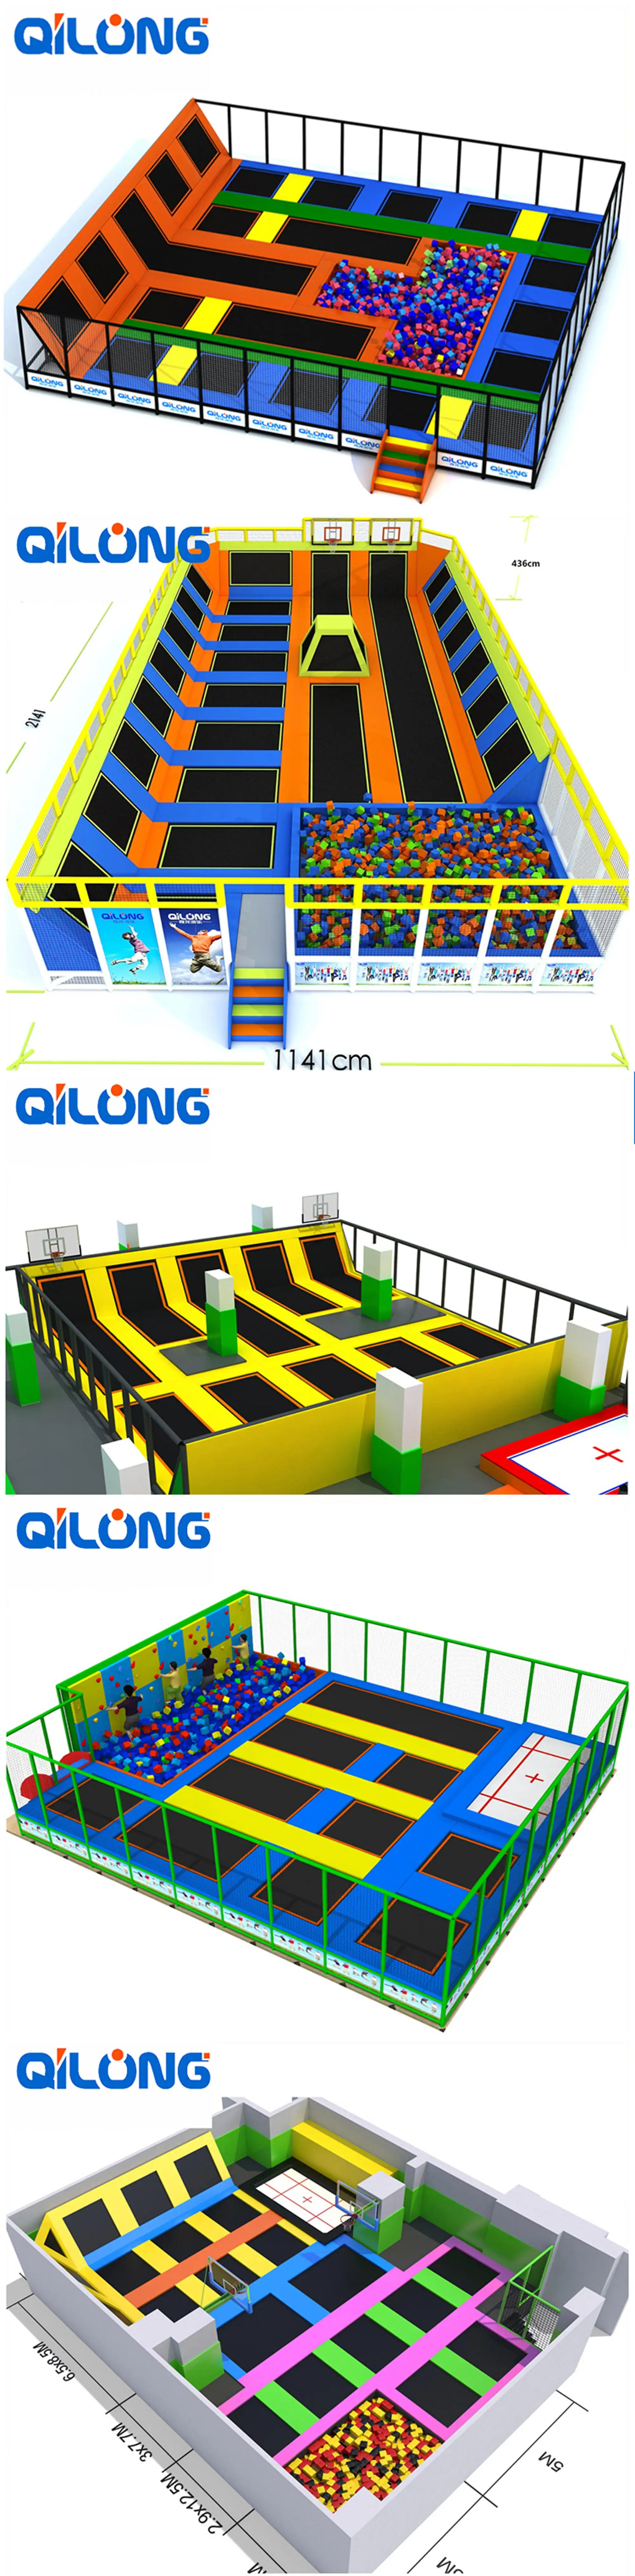 Super Jump Trampoline Park,Kids Indoor Trampoline Park With Climbing Wall And Basketball - Buy ...